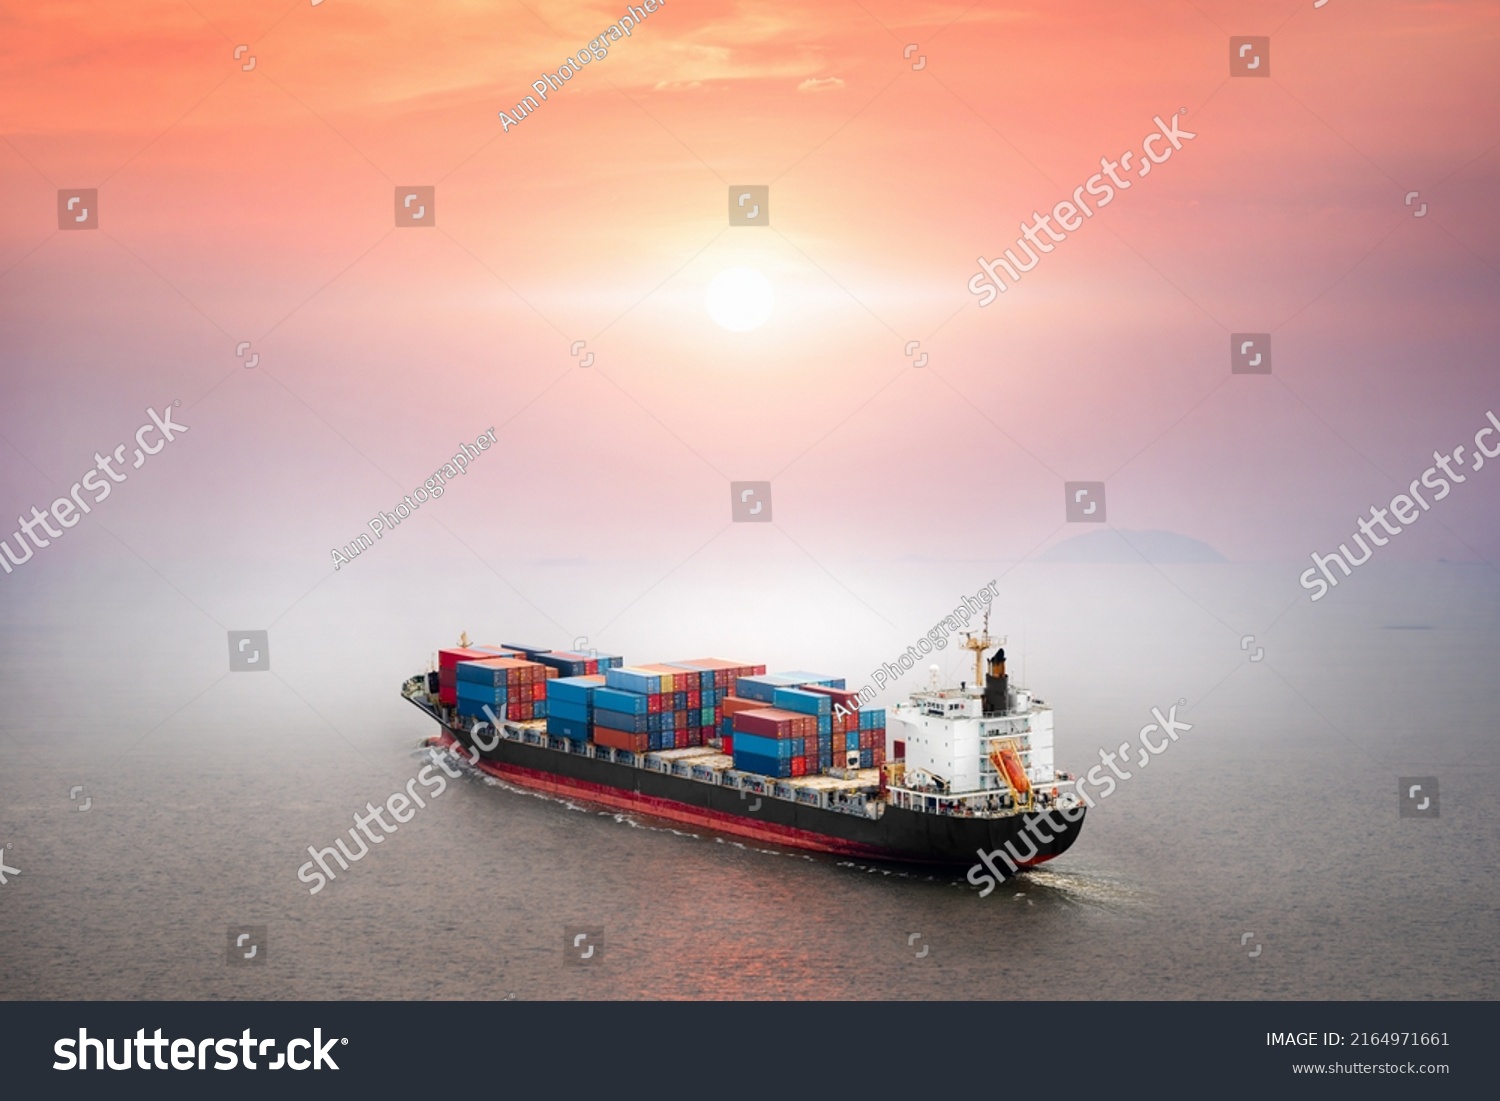 Container ship in the ocean at sunset sky background with copy space, Global business logistics import export goods of freight carrier, cargo transportation industry concept, Sea Freight Shipping #2164971661